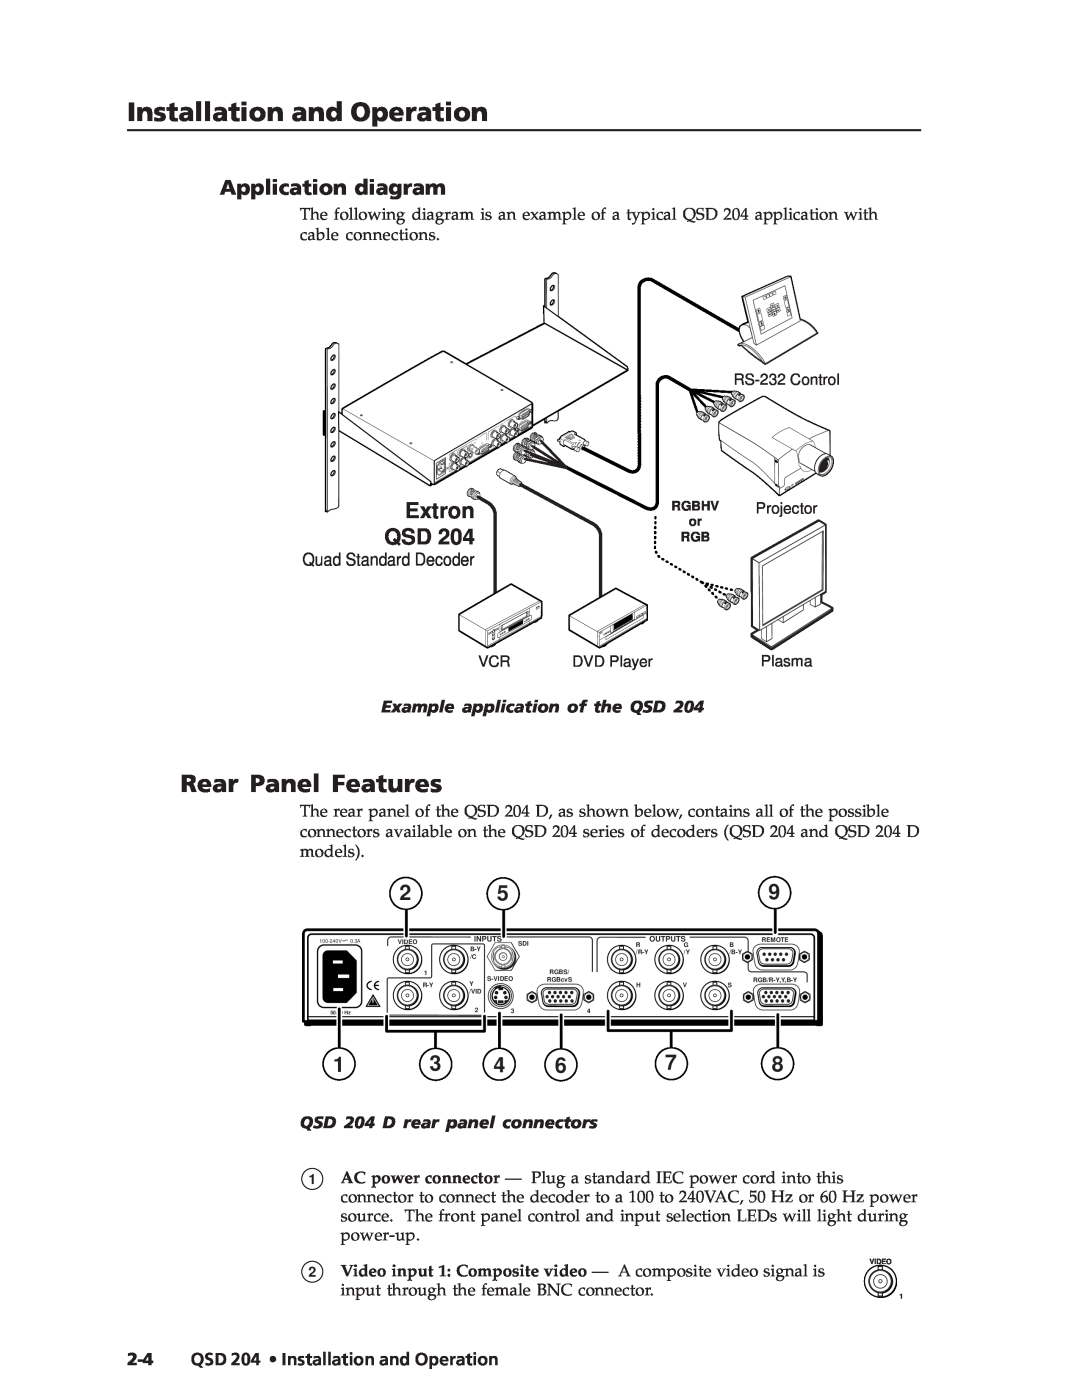 Extron electronic QSD 204 D manual Rear Panel Features, Application diagram, Example application of the QSD, Extron 